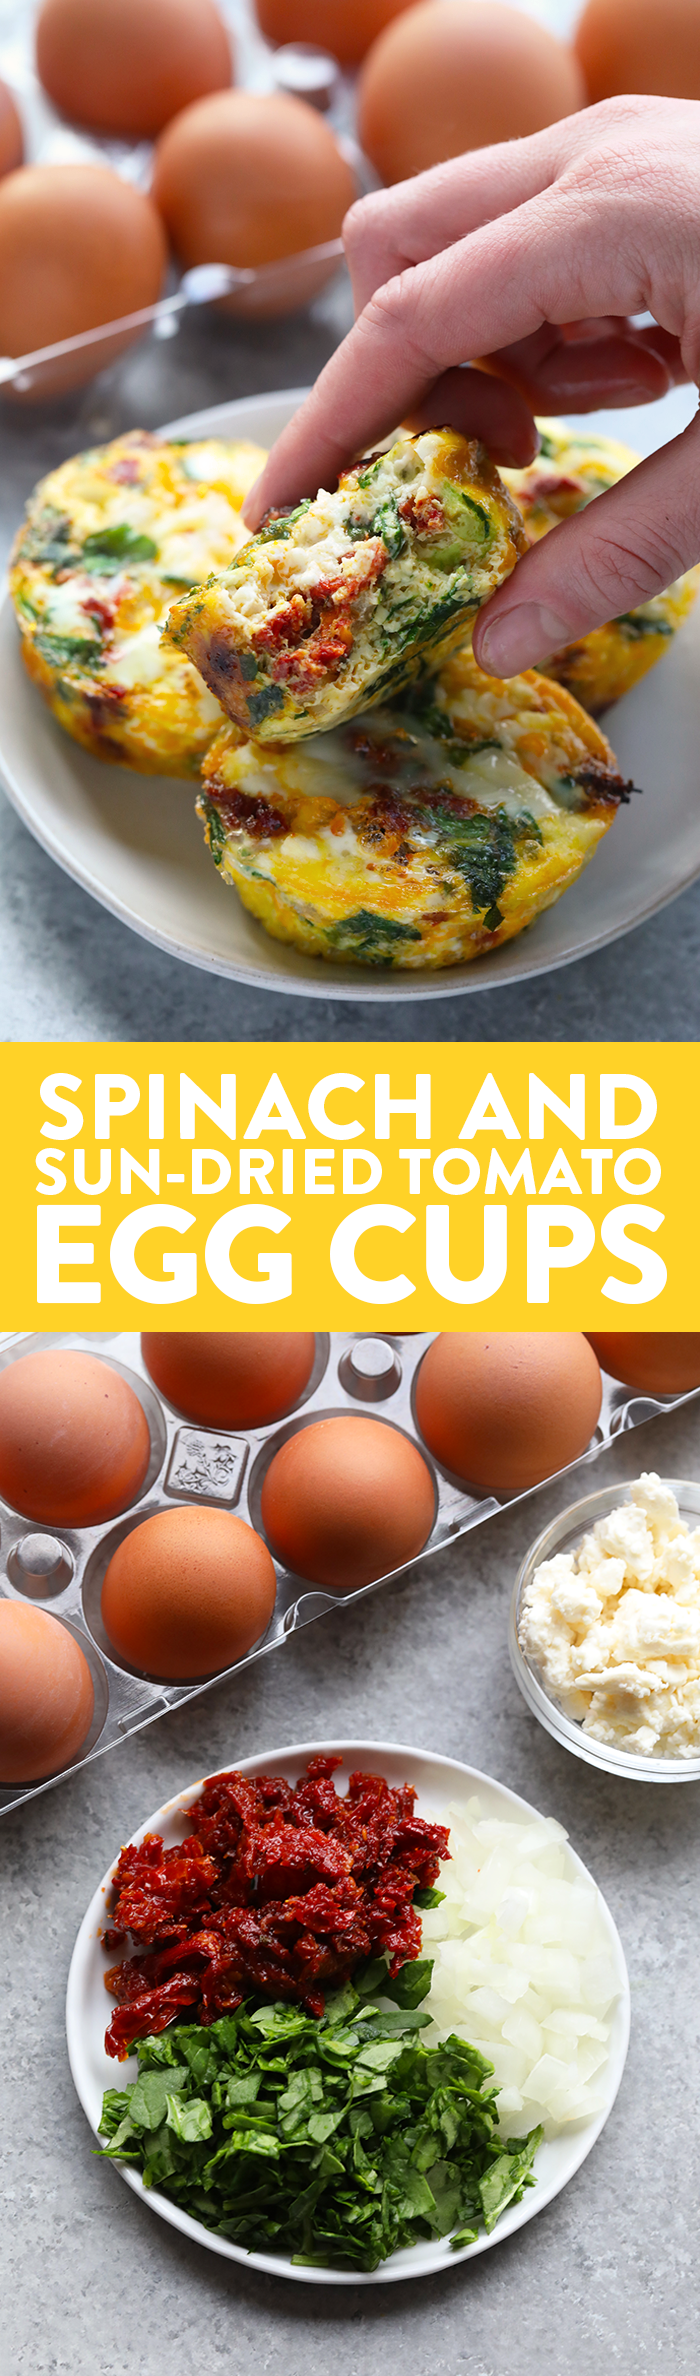 Spinach and Sun Dried Tomato Egg Cups